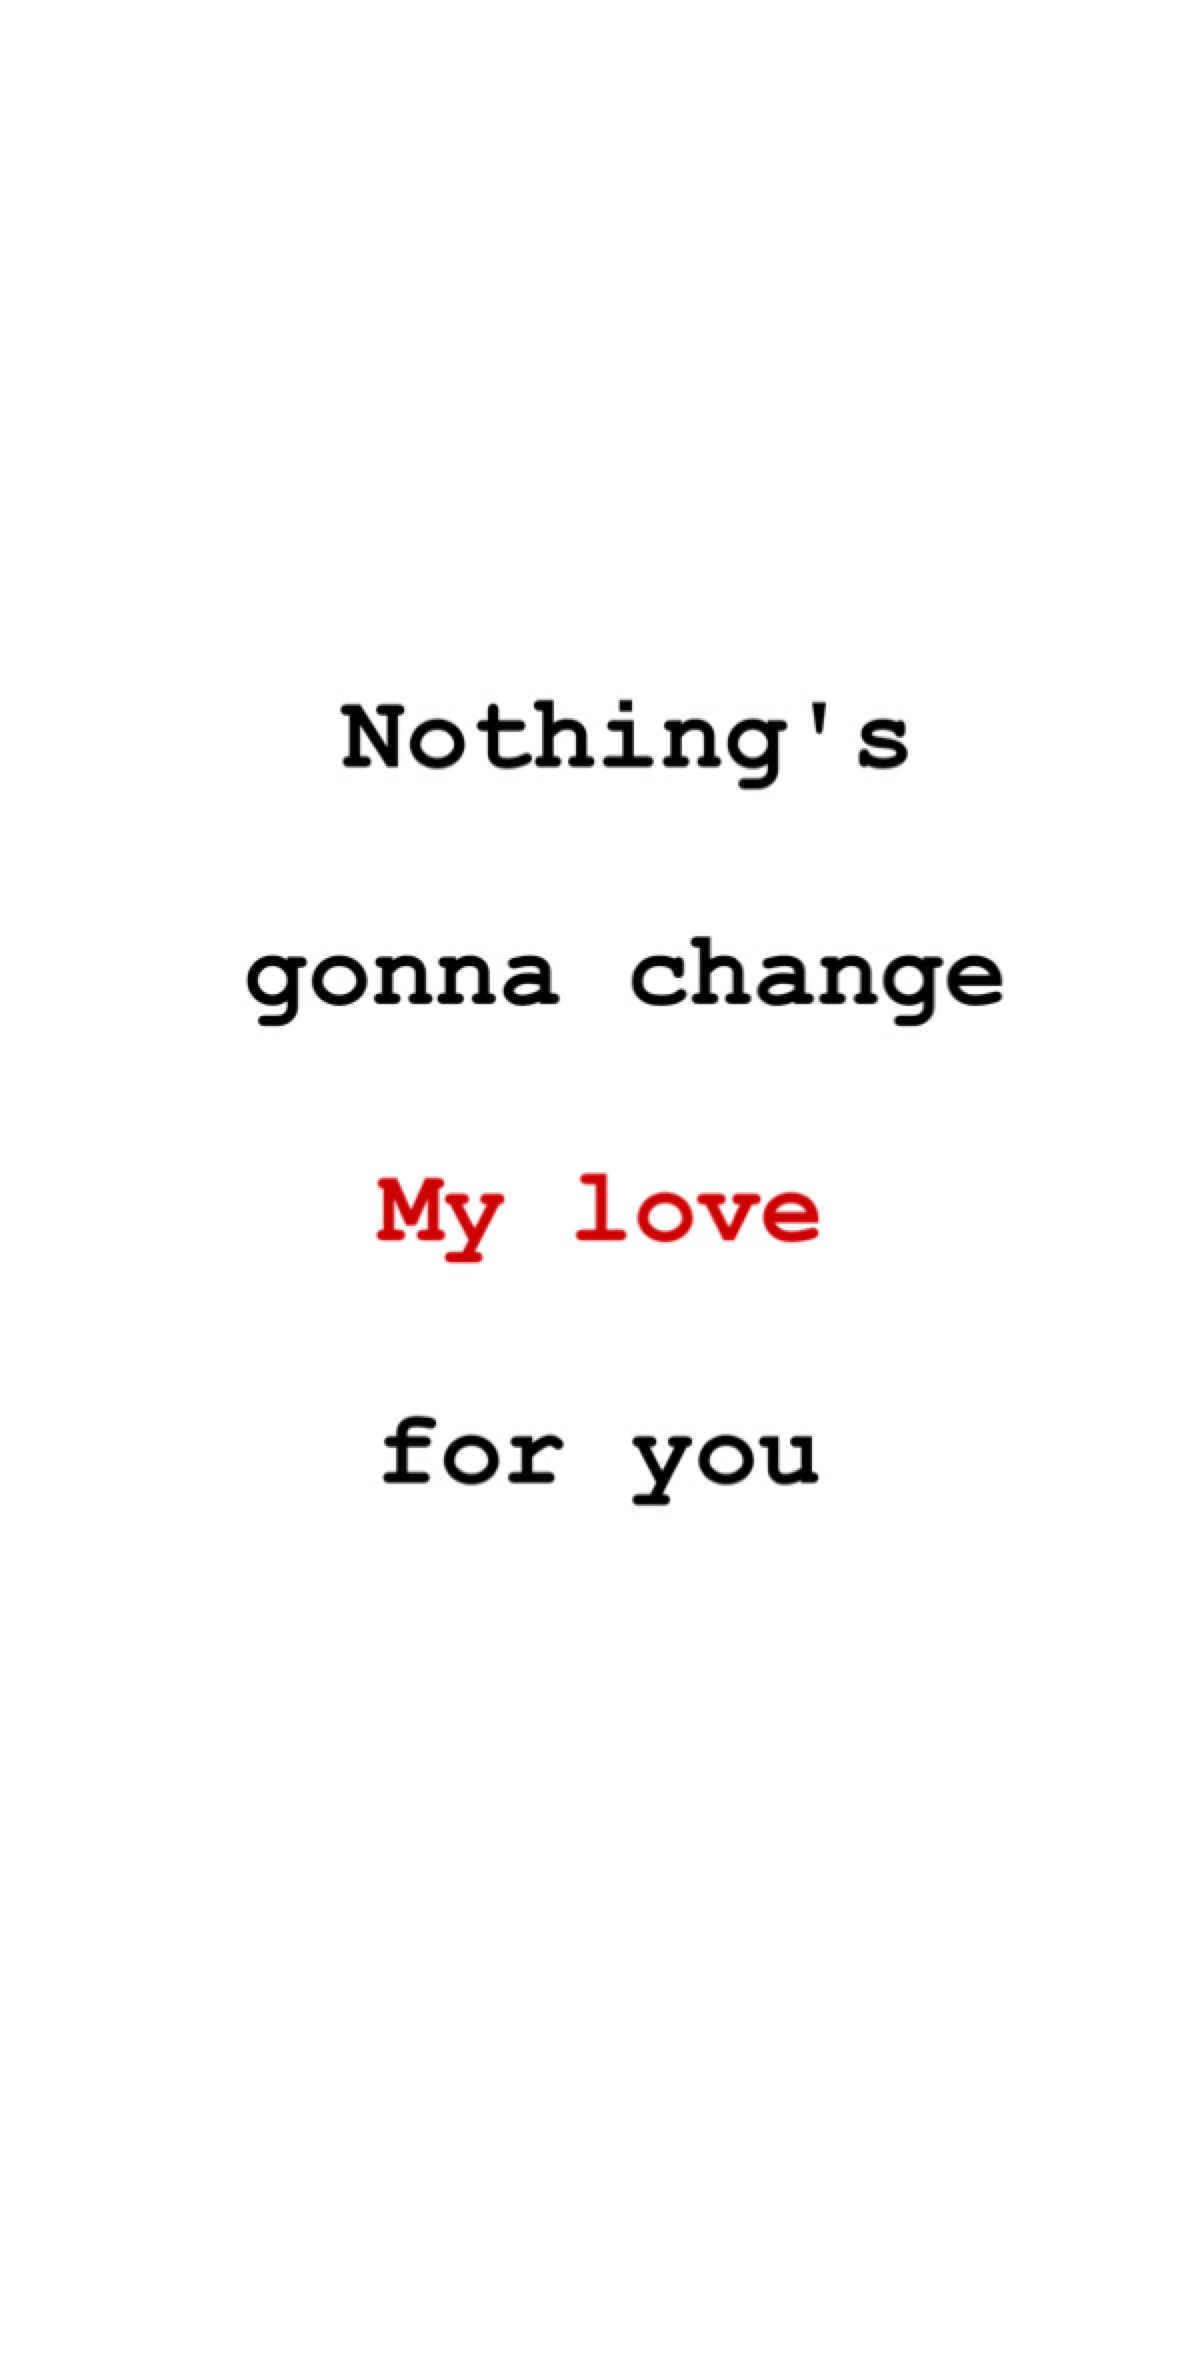 nothing"s gonna change my love for you !